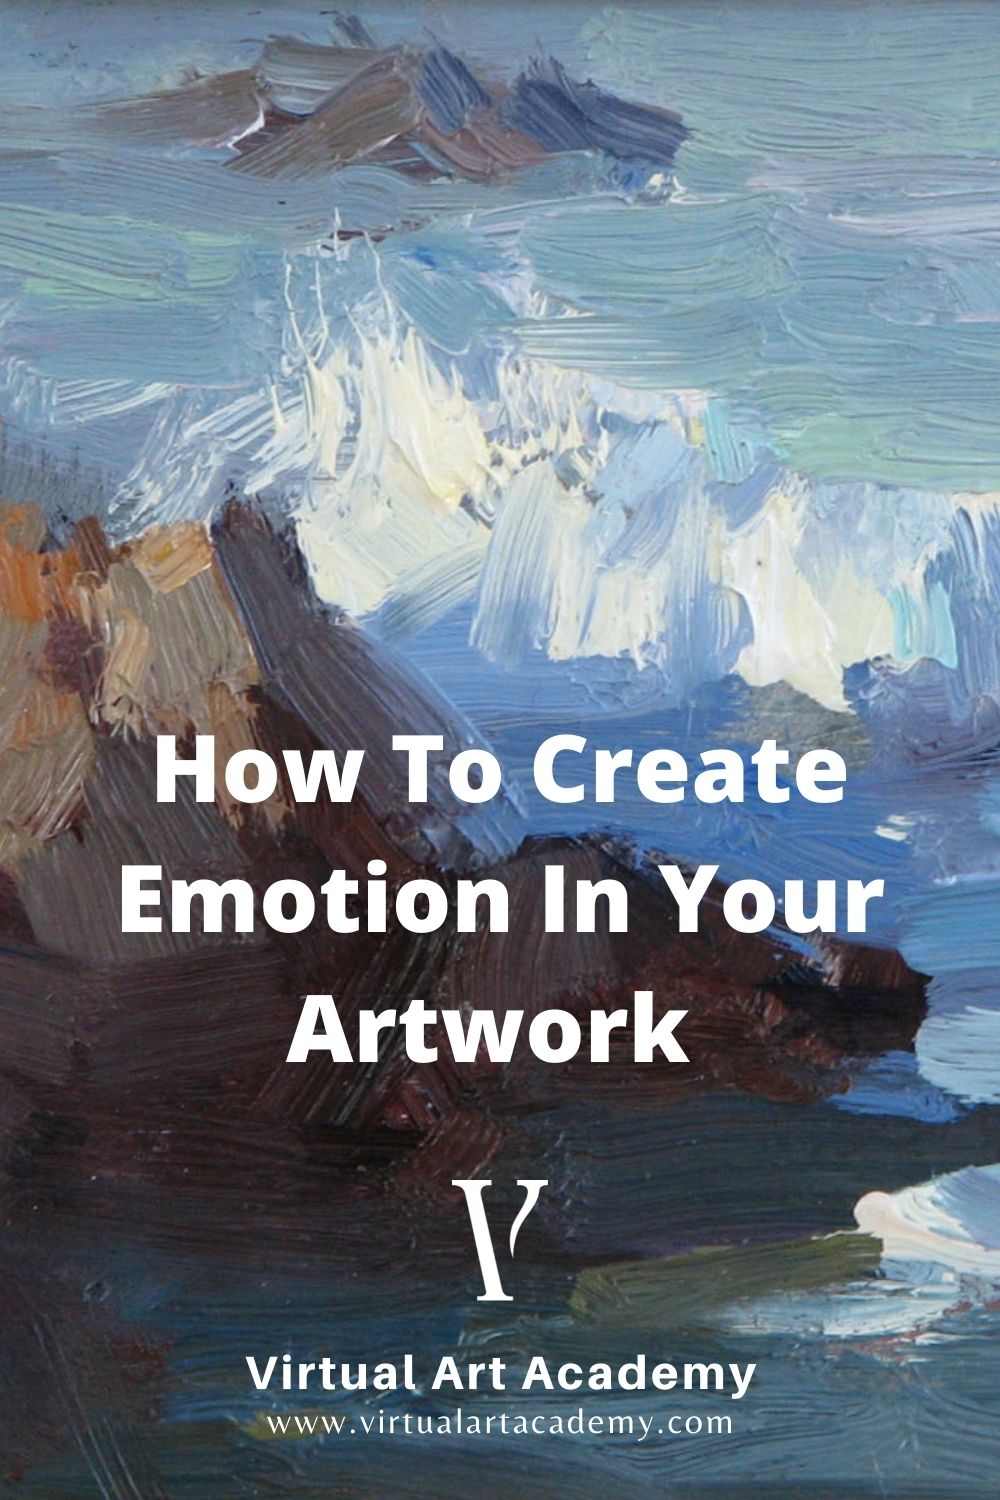 How to Convey Emotion in Art